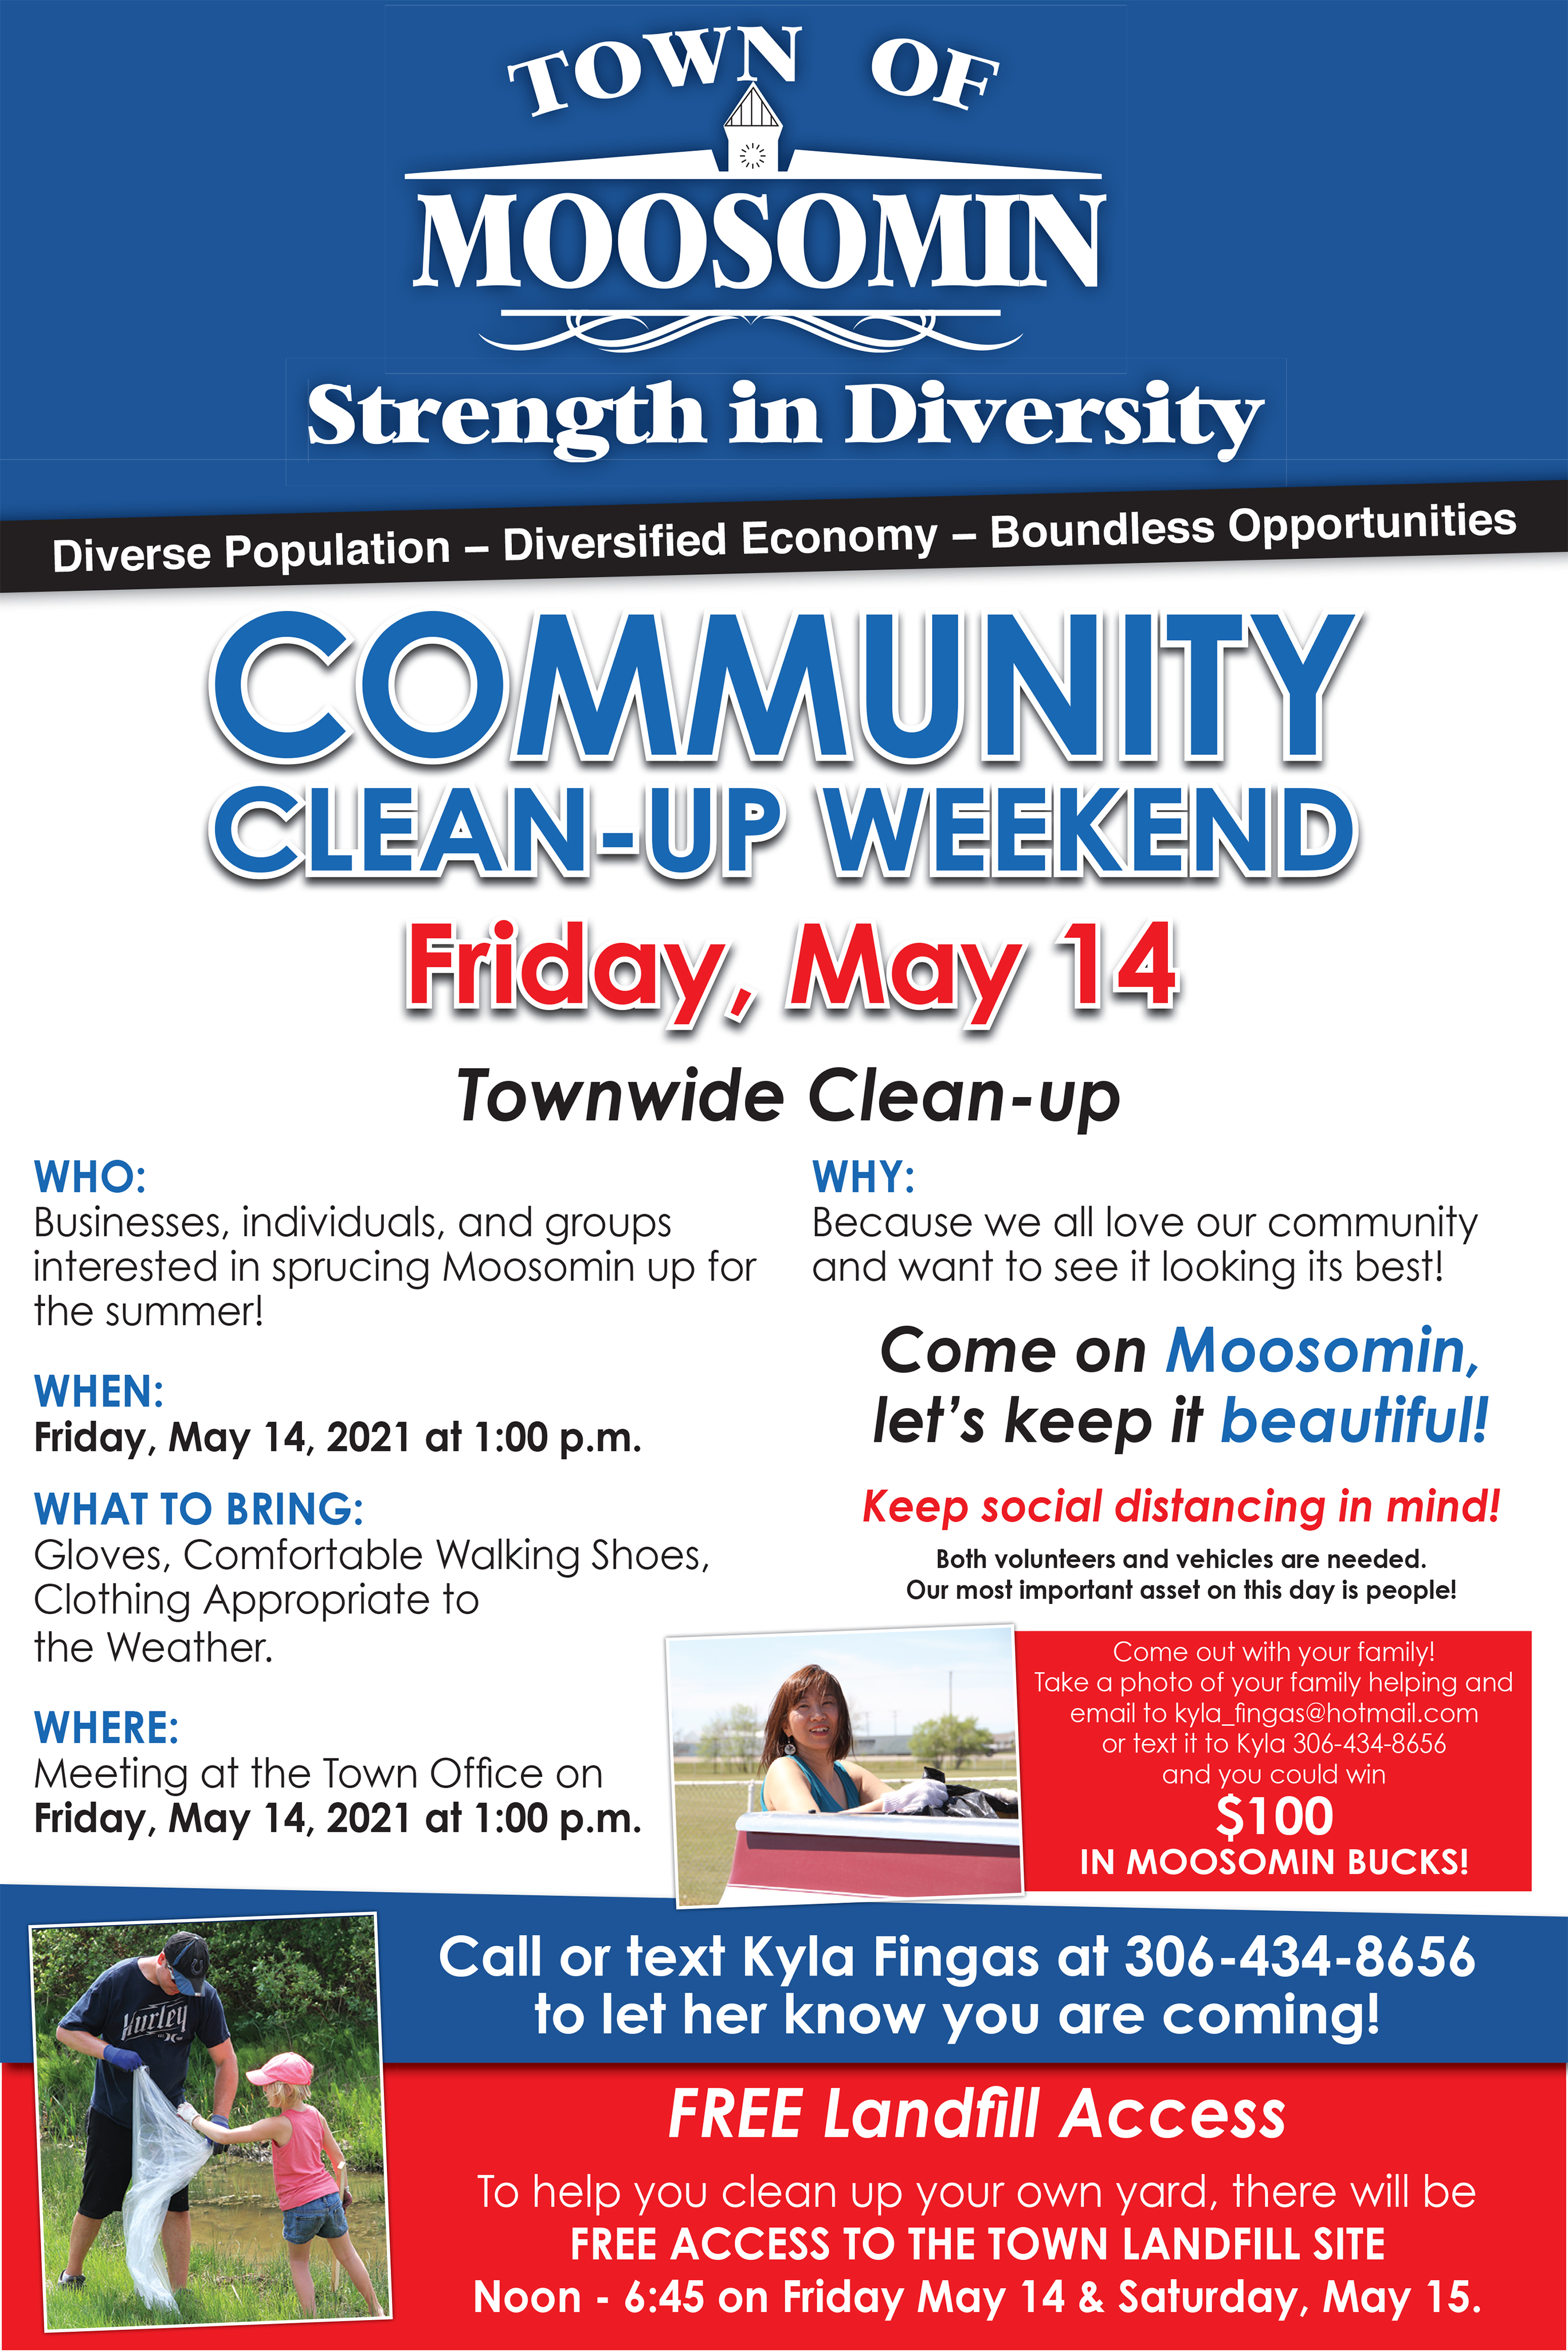 Town of Moosomin Ad